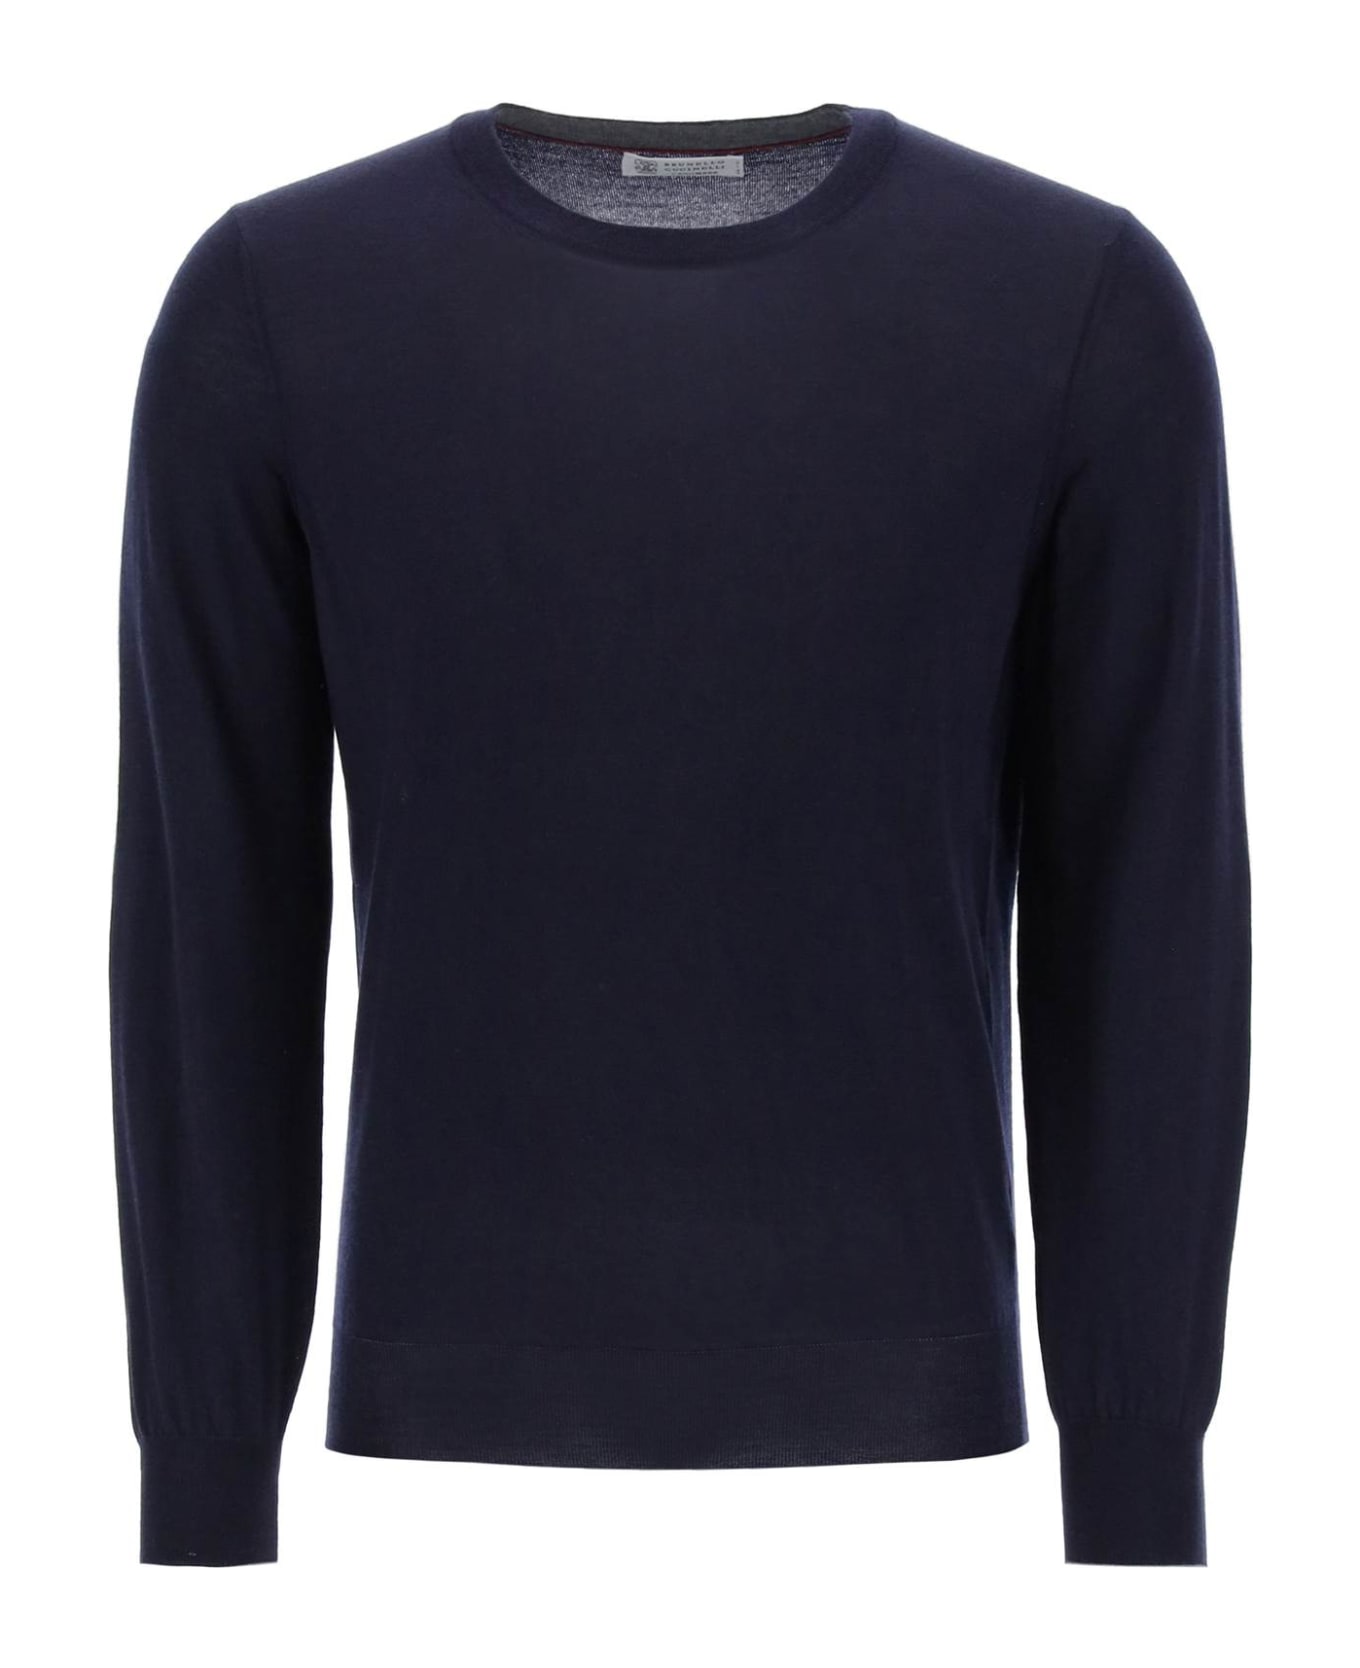 Brunello Cucinelli Wool And Cashmere Blend Sweater - Navy